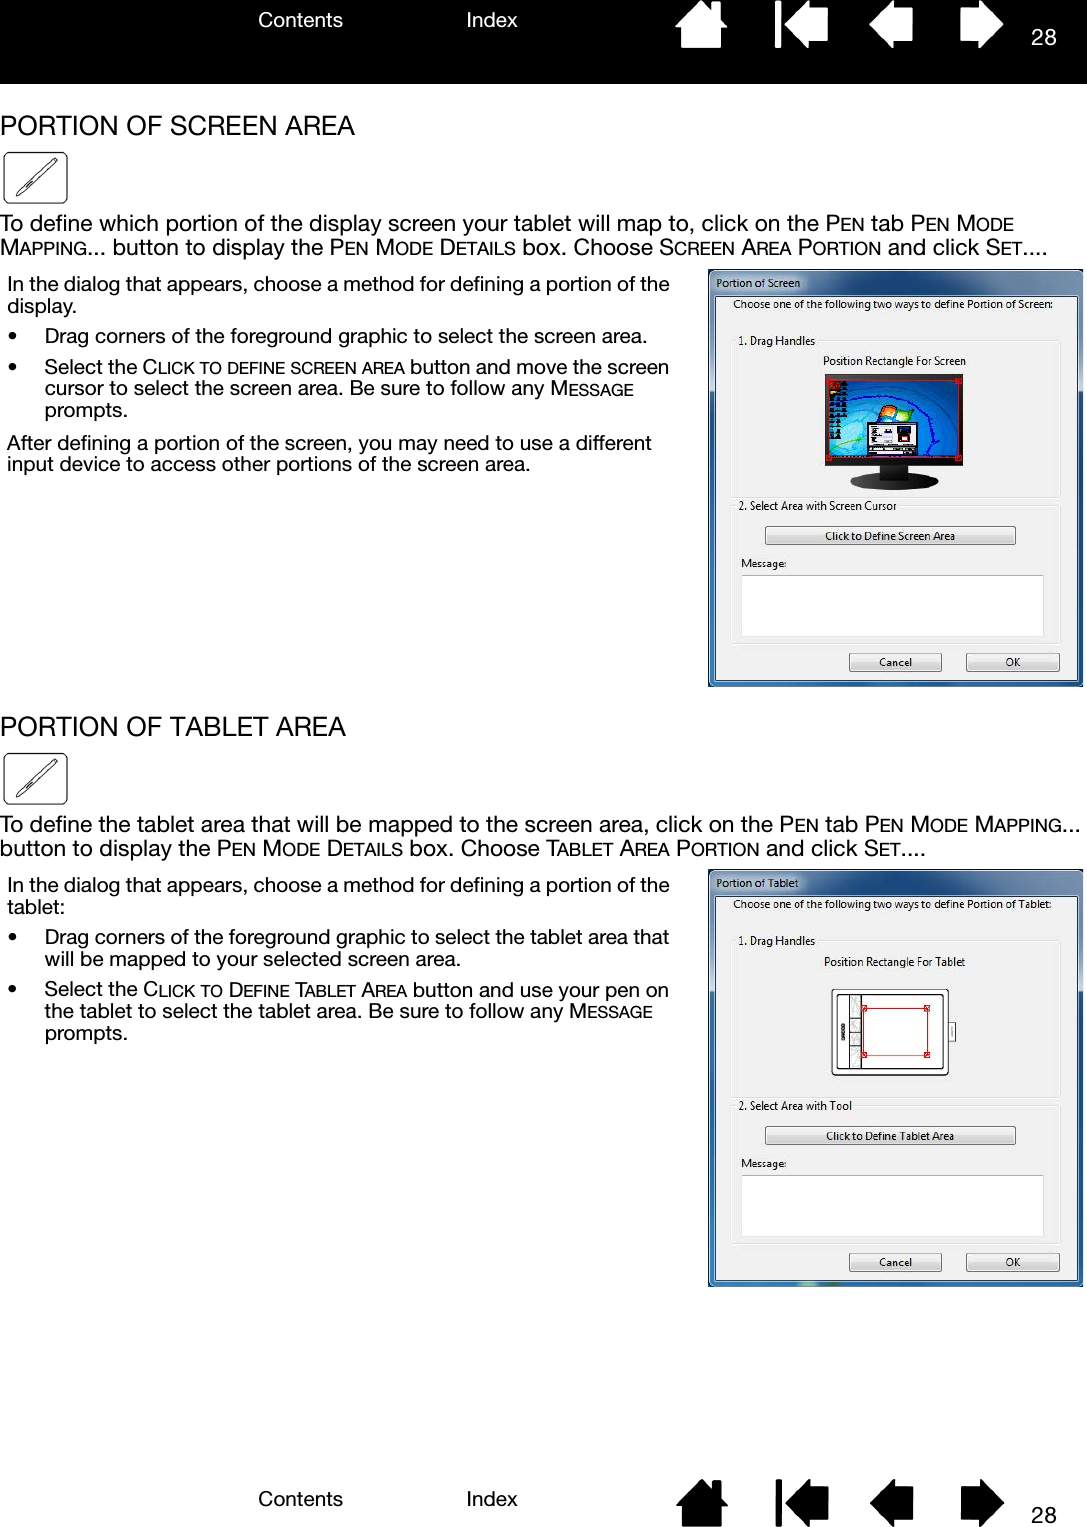 Contents IndexContents 28Index28PORTION OF SCREEN AREATo define which portion of the display screen your tablet will map to, click on the PEN tab PEN MODE MAPPING... button to display the PEN MODE DETAILS box. Choose SCREEN AREA PORTION and click SET....PORTION OF TABLET AREATo define the tablet area that will be mapped to the screen area, click on the PEN tab PEN MODE MAPPING... button to display the PEN MODE DETAILS box. Choose TABLET AREA PORTION and click SET....In the dialog that appears, choose a method for defining a portion of the display.• Drag corners of the foreground graphic to select the screen area.• Select the CLICK TO DEFINE SCREEN AREA button and move the screen cursor to select the screen area. Be sure to follow any MESSAGE prompts.After defining a portion of the screen, you may need to use a different input device to access other portions of the screen area.In the dialog that appears, choose a method for defining a portion of the tablet:• Drag corners of the foreground graphic to select the tablet area that will be mapped to your selected screen area.• Select the CLICK TO DEFINE TABLET AREA button and use your pen on the tablet to select the tablet area. Be sure to follow any MESSAGE prompts.